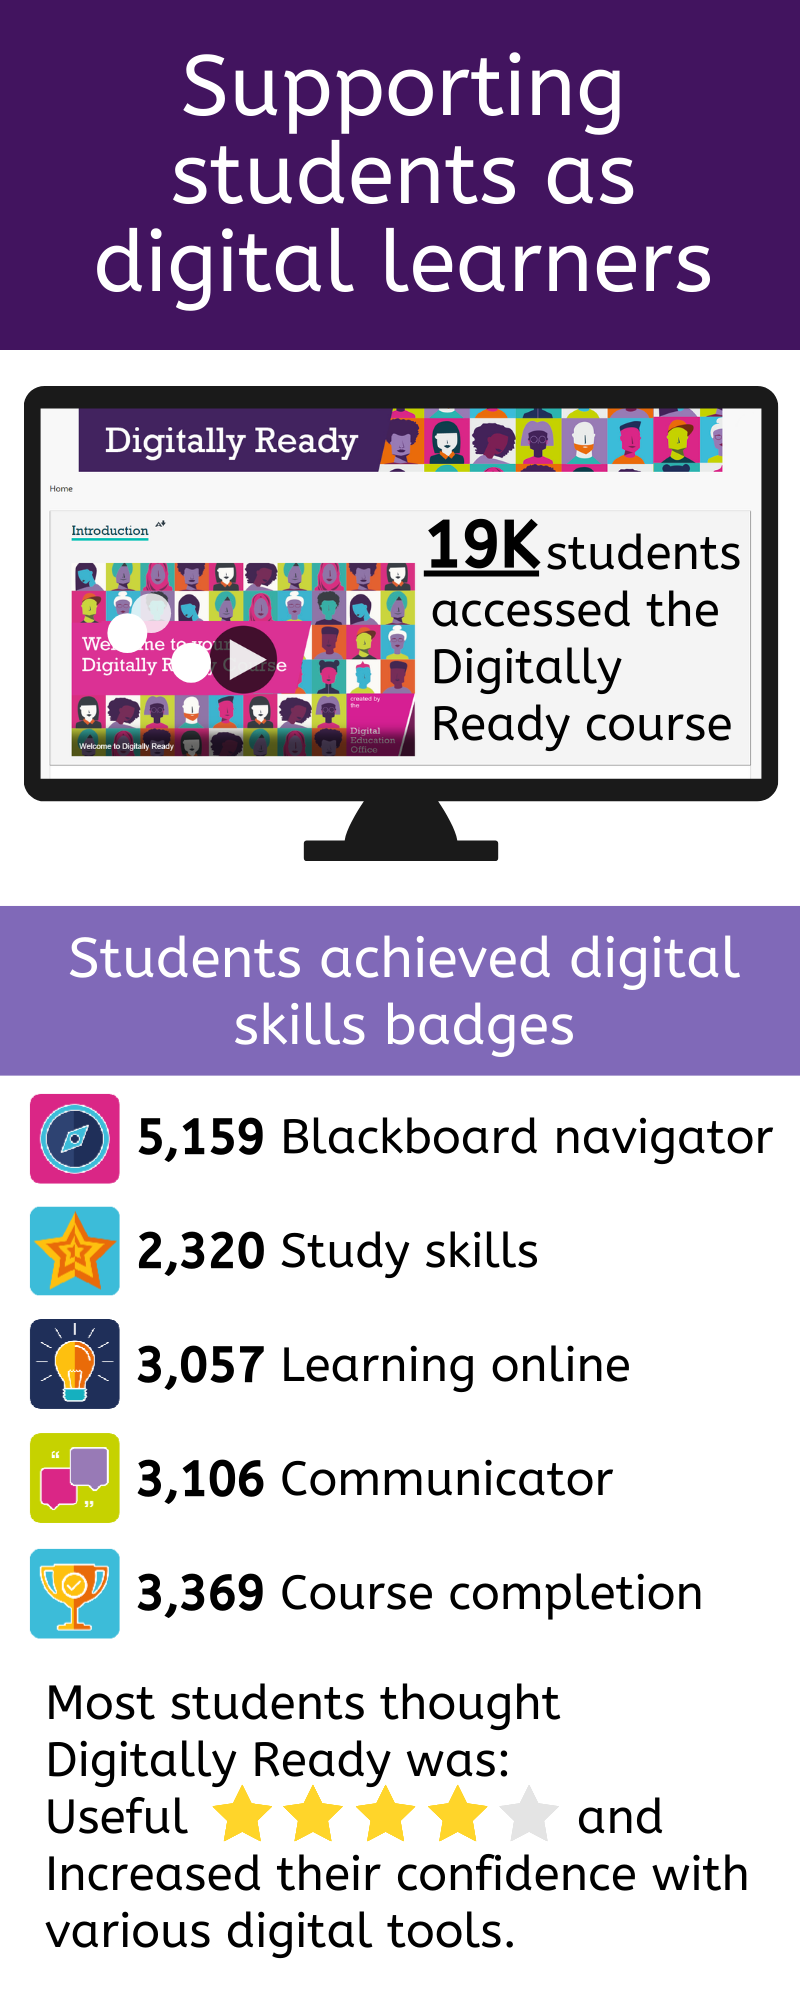 Supporting students as digital learners. 19K students accessed the Digitally Ready course. Students achieved digital skills badges: 5,159 Blackboard navigator, 2,320 Study Skills, 3,057 Learning Online, 3,106 Communicator, 3,369 Course completion. Most students thought Digitally Ready was useful (4/5 stars) and increased their confidence with various digital tools. Click for more details.